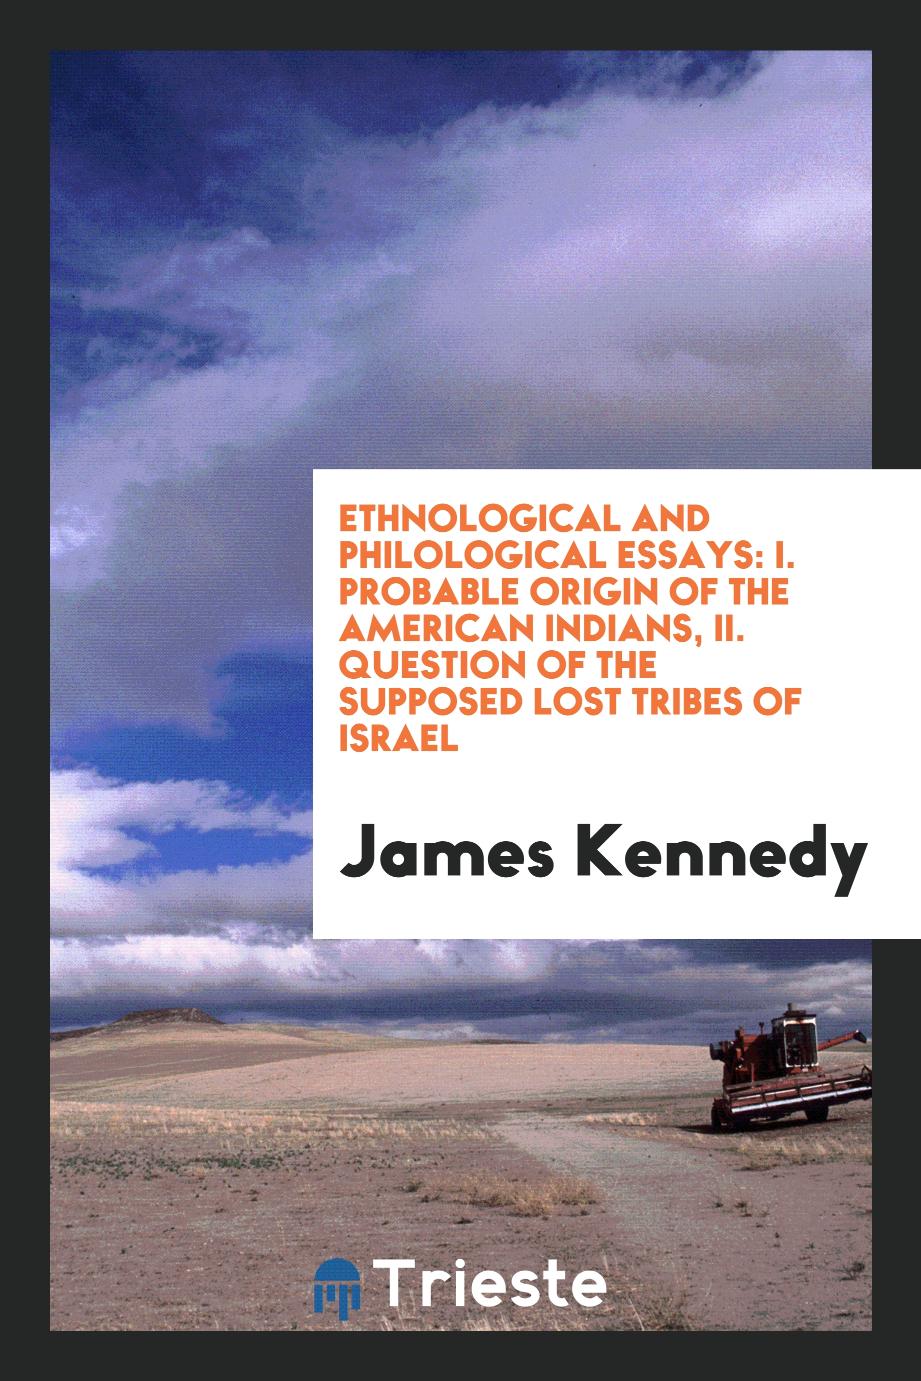 Ethnological and Philological Essays: I. Probable Origin of the American Indians, II. Question of the Supposed Lost Tribes of Israel